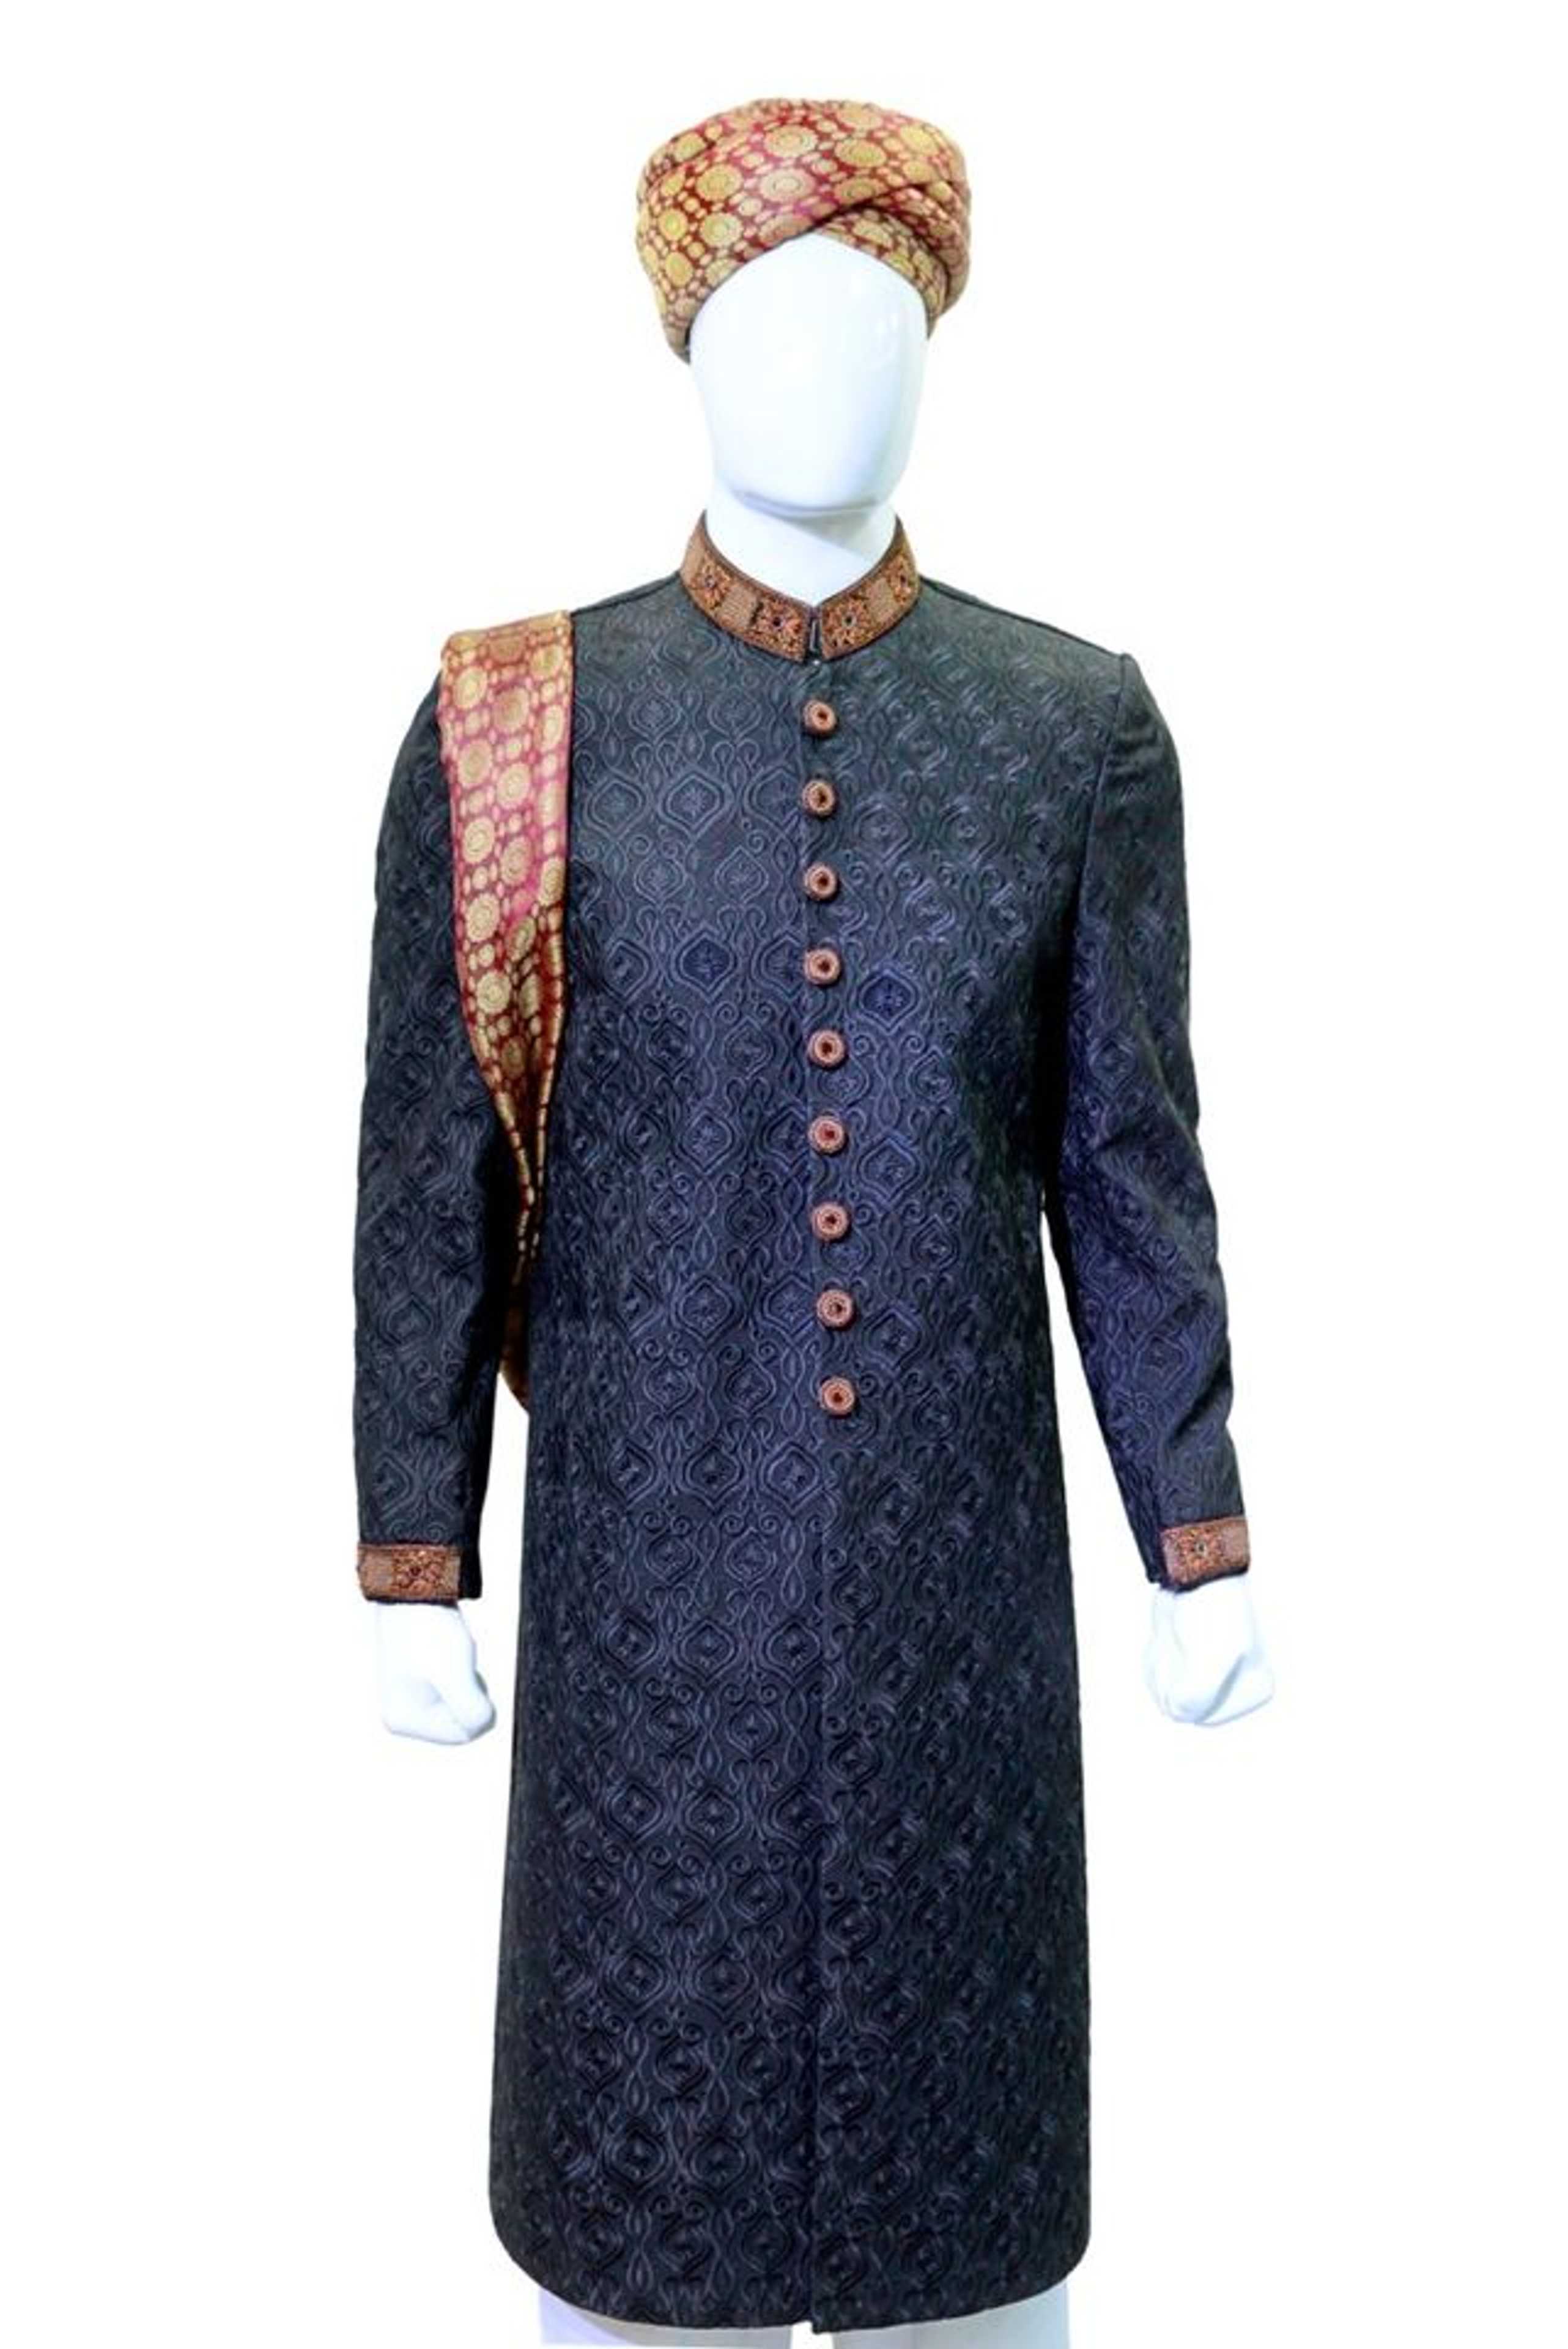 "Men's Sherwani w/ crown (pictured) and Khussa (shoes) "